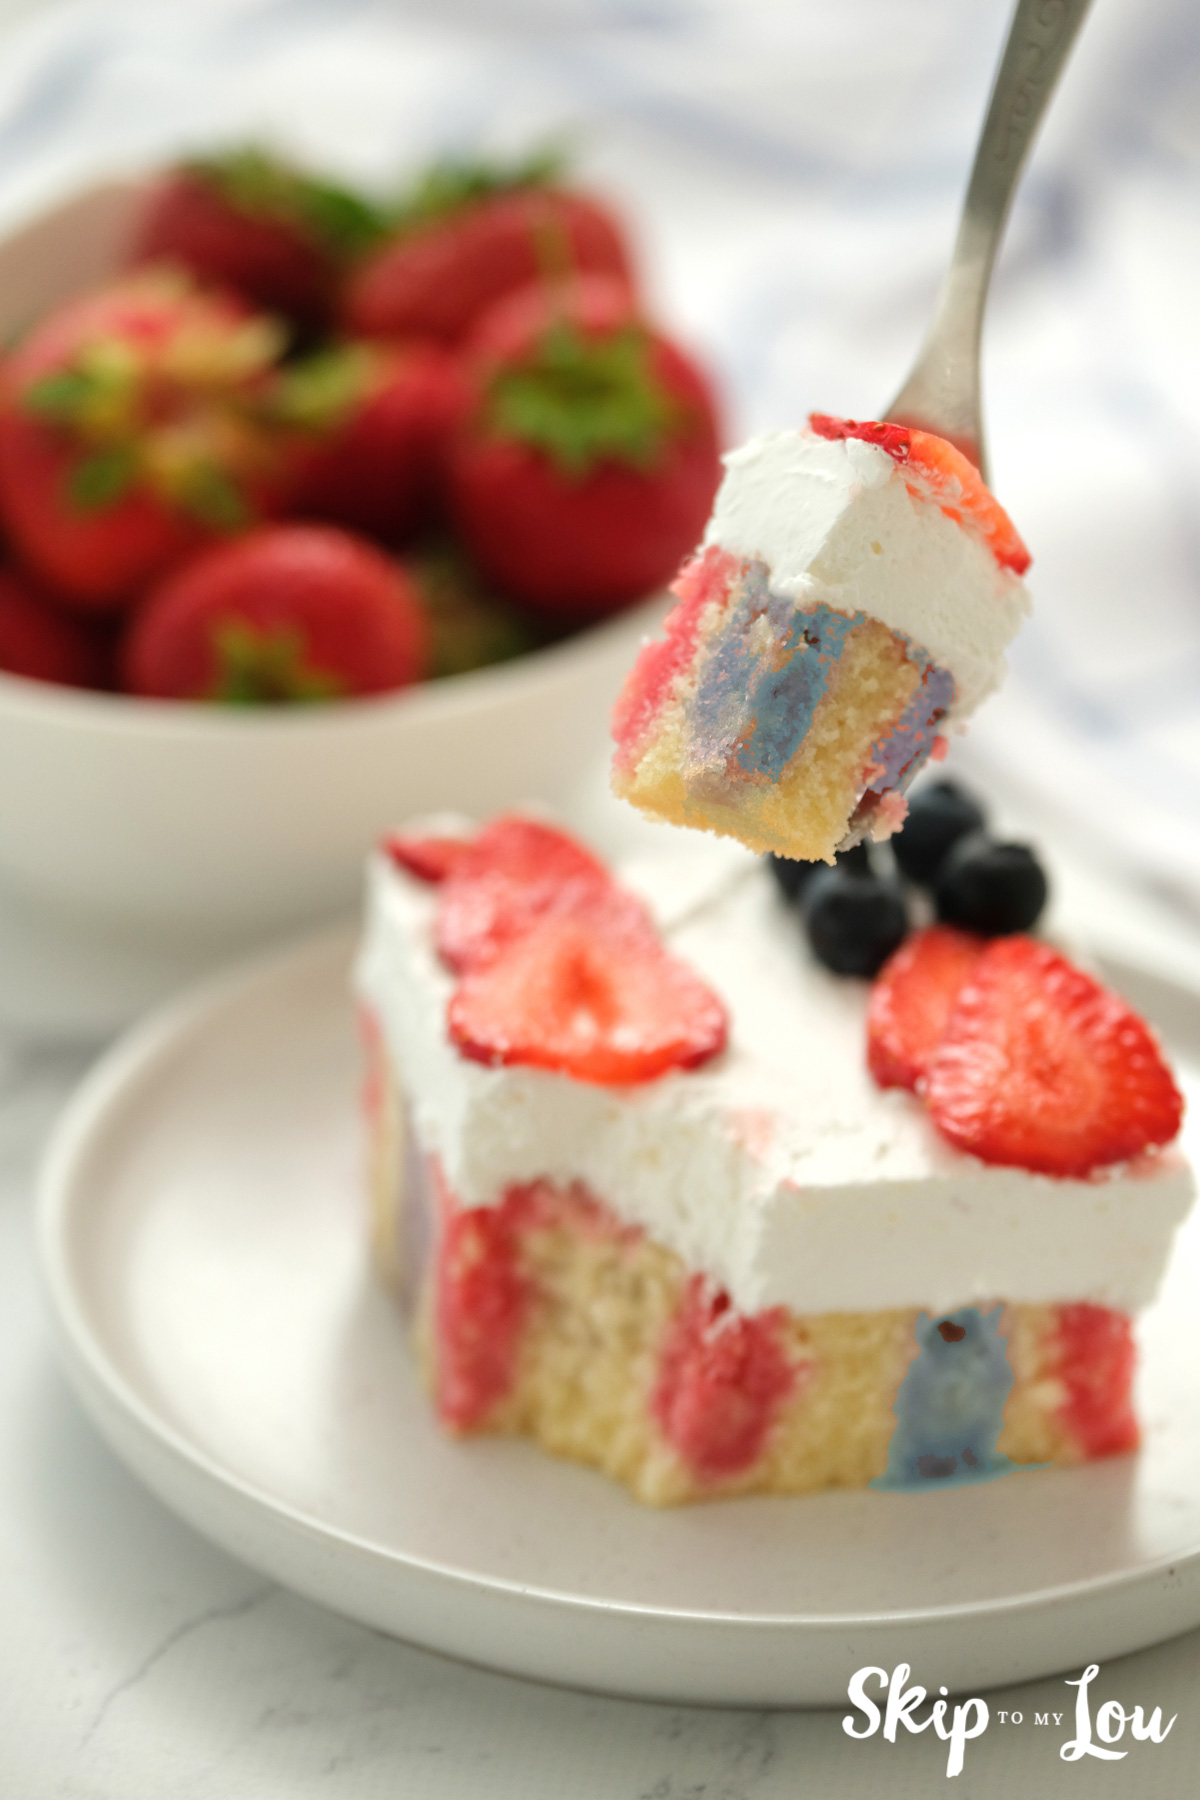 A piece of red white and blue jello poke cake with berries on top and a serving of strawberries next to it.